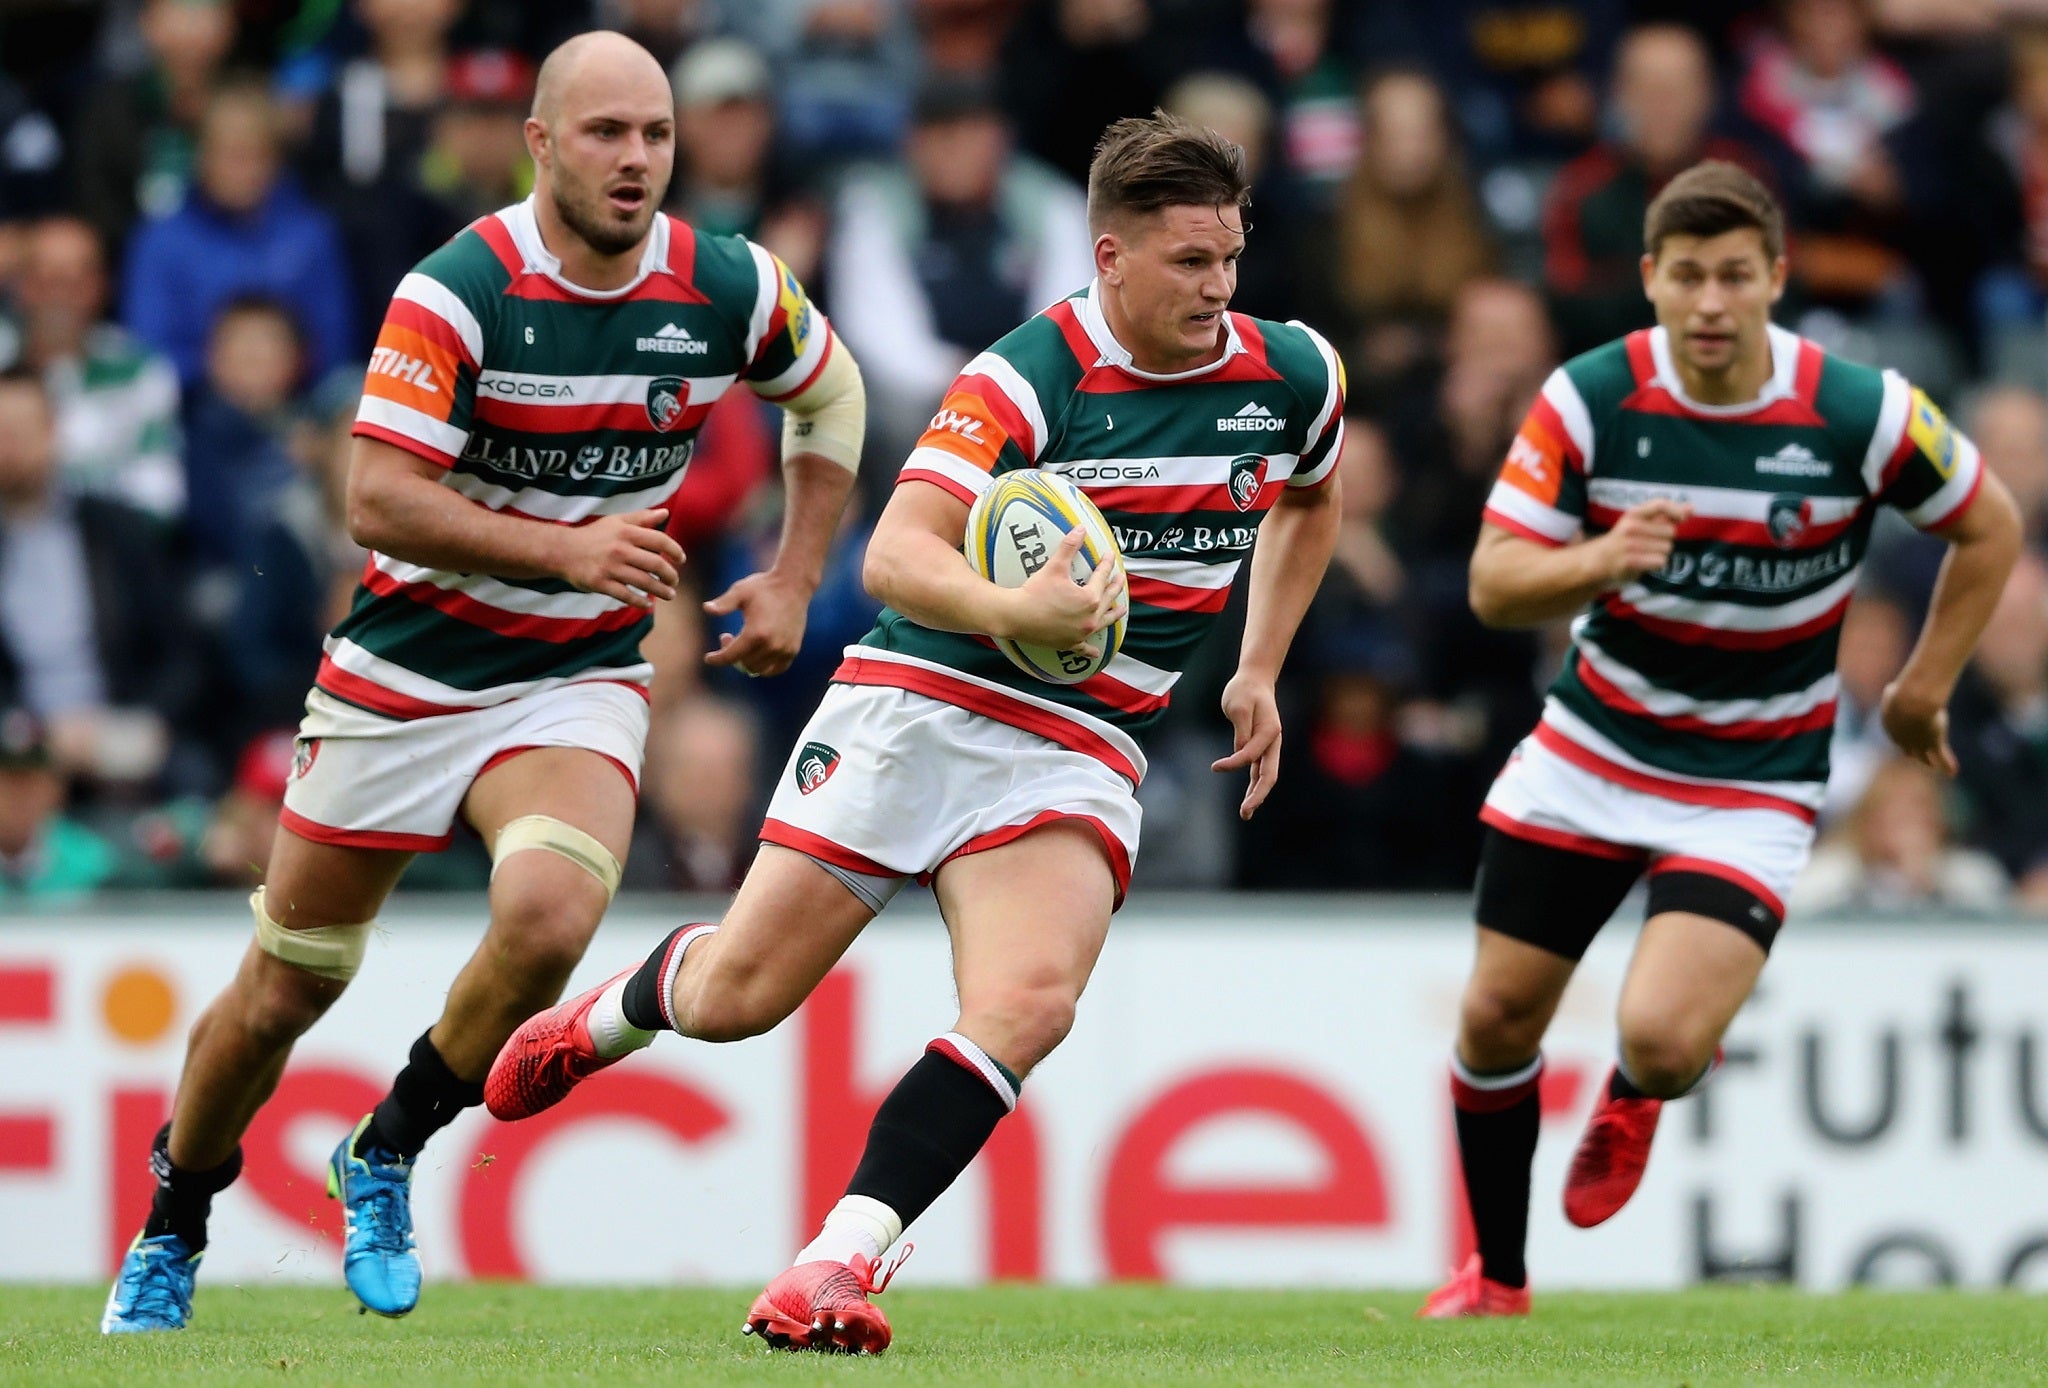 Freddie Burns scored 16 points including a try to secure victory for Leicester